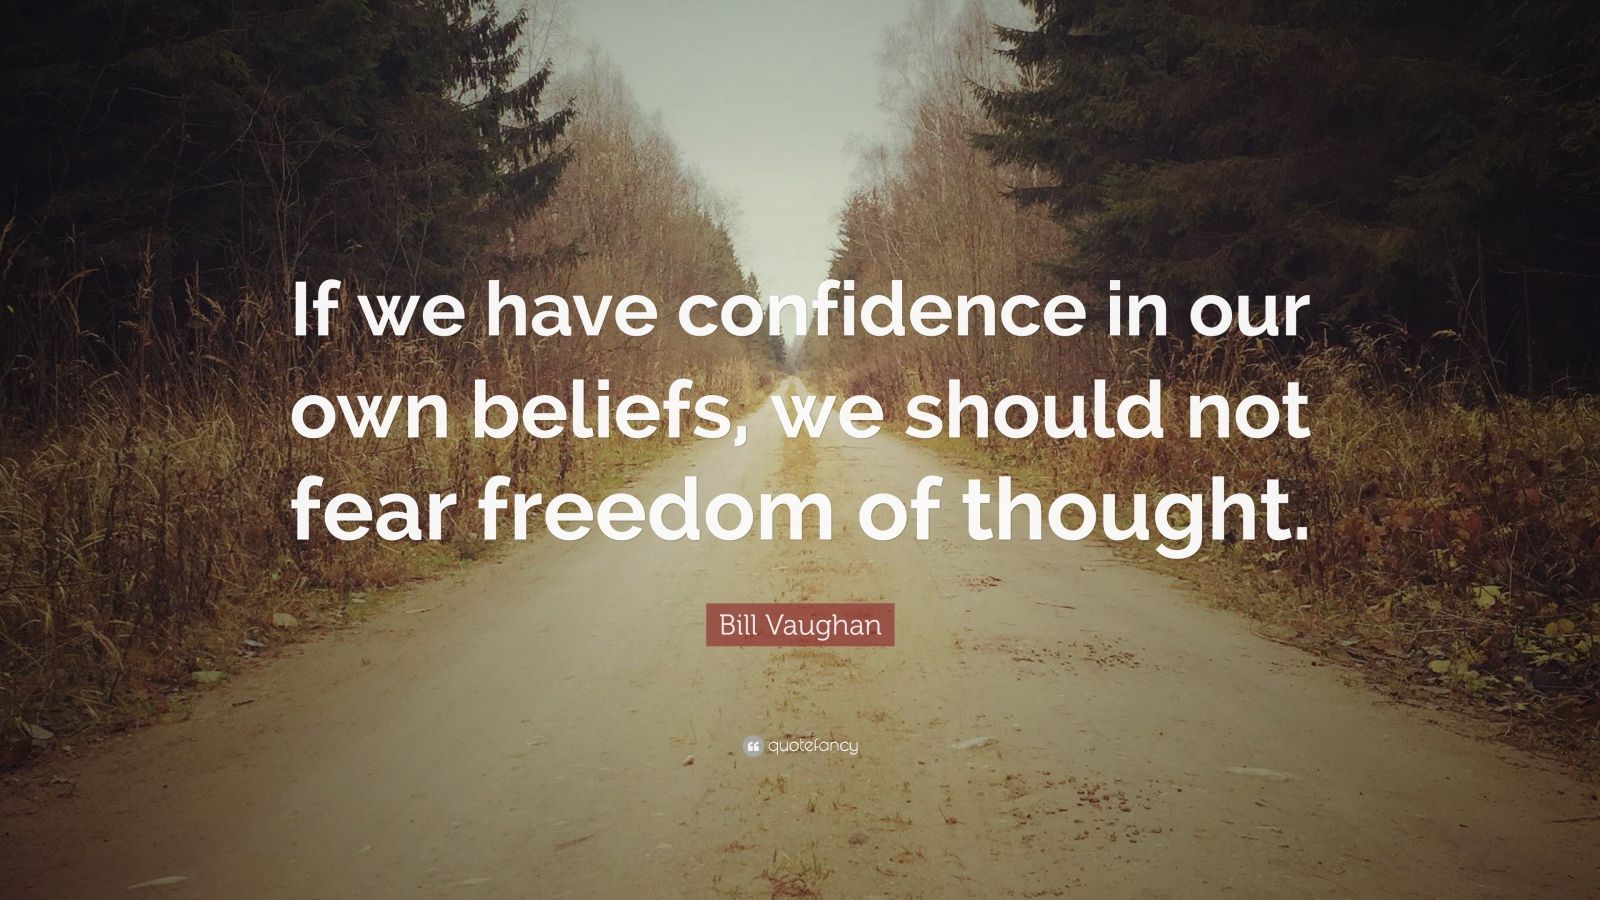 Bill Vaughan Quote: “If we have confidence in our own beliefs, we ...